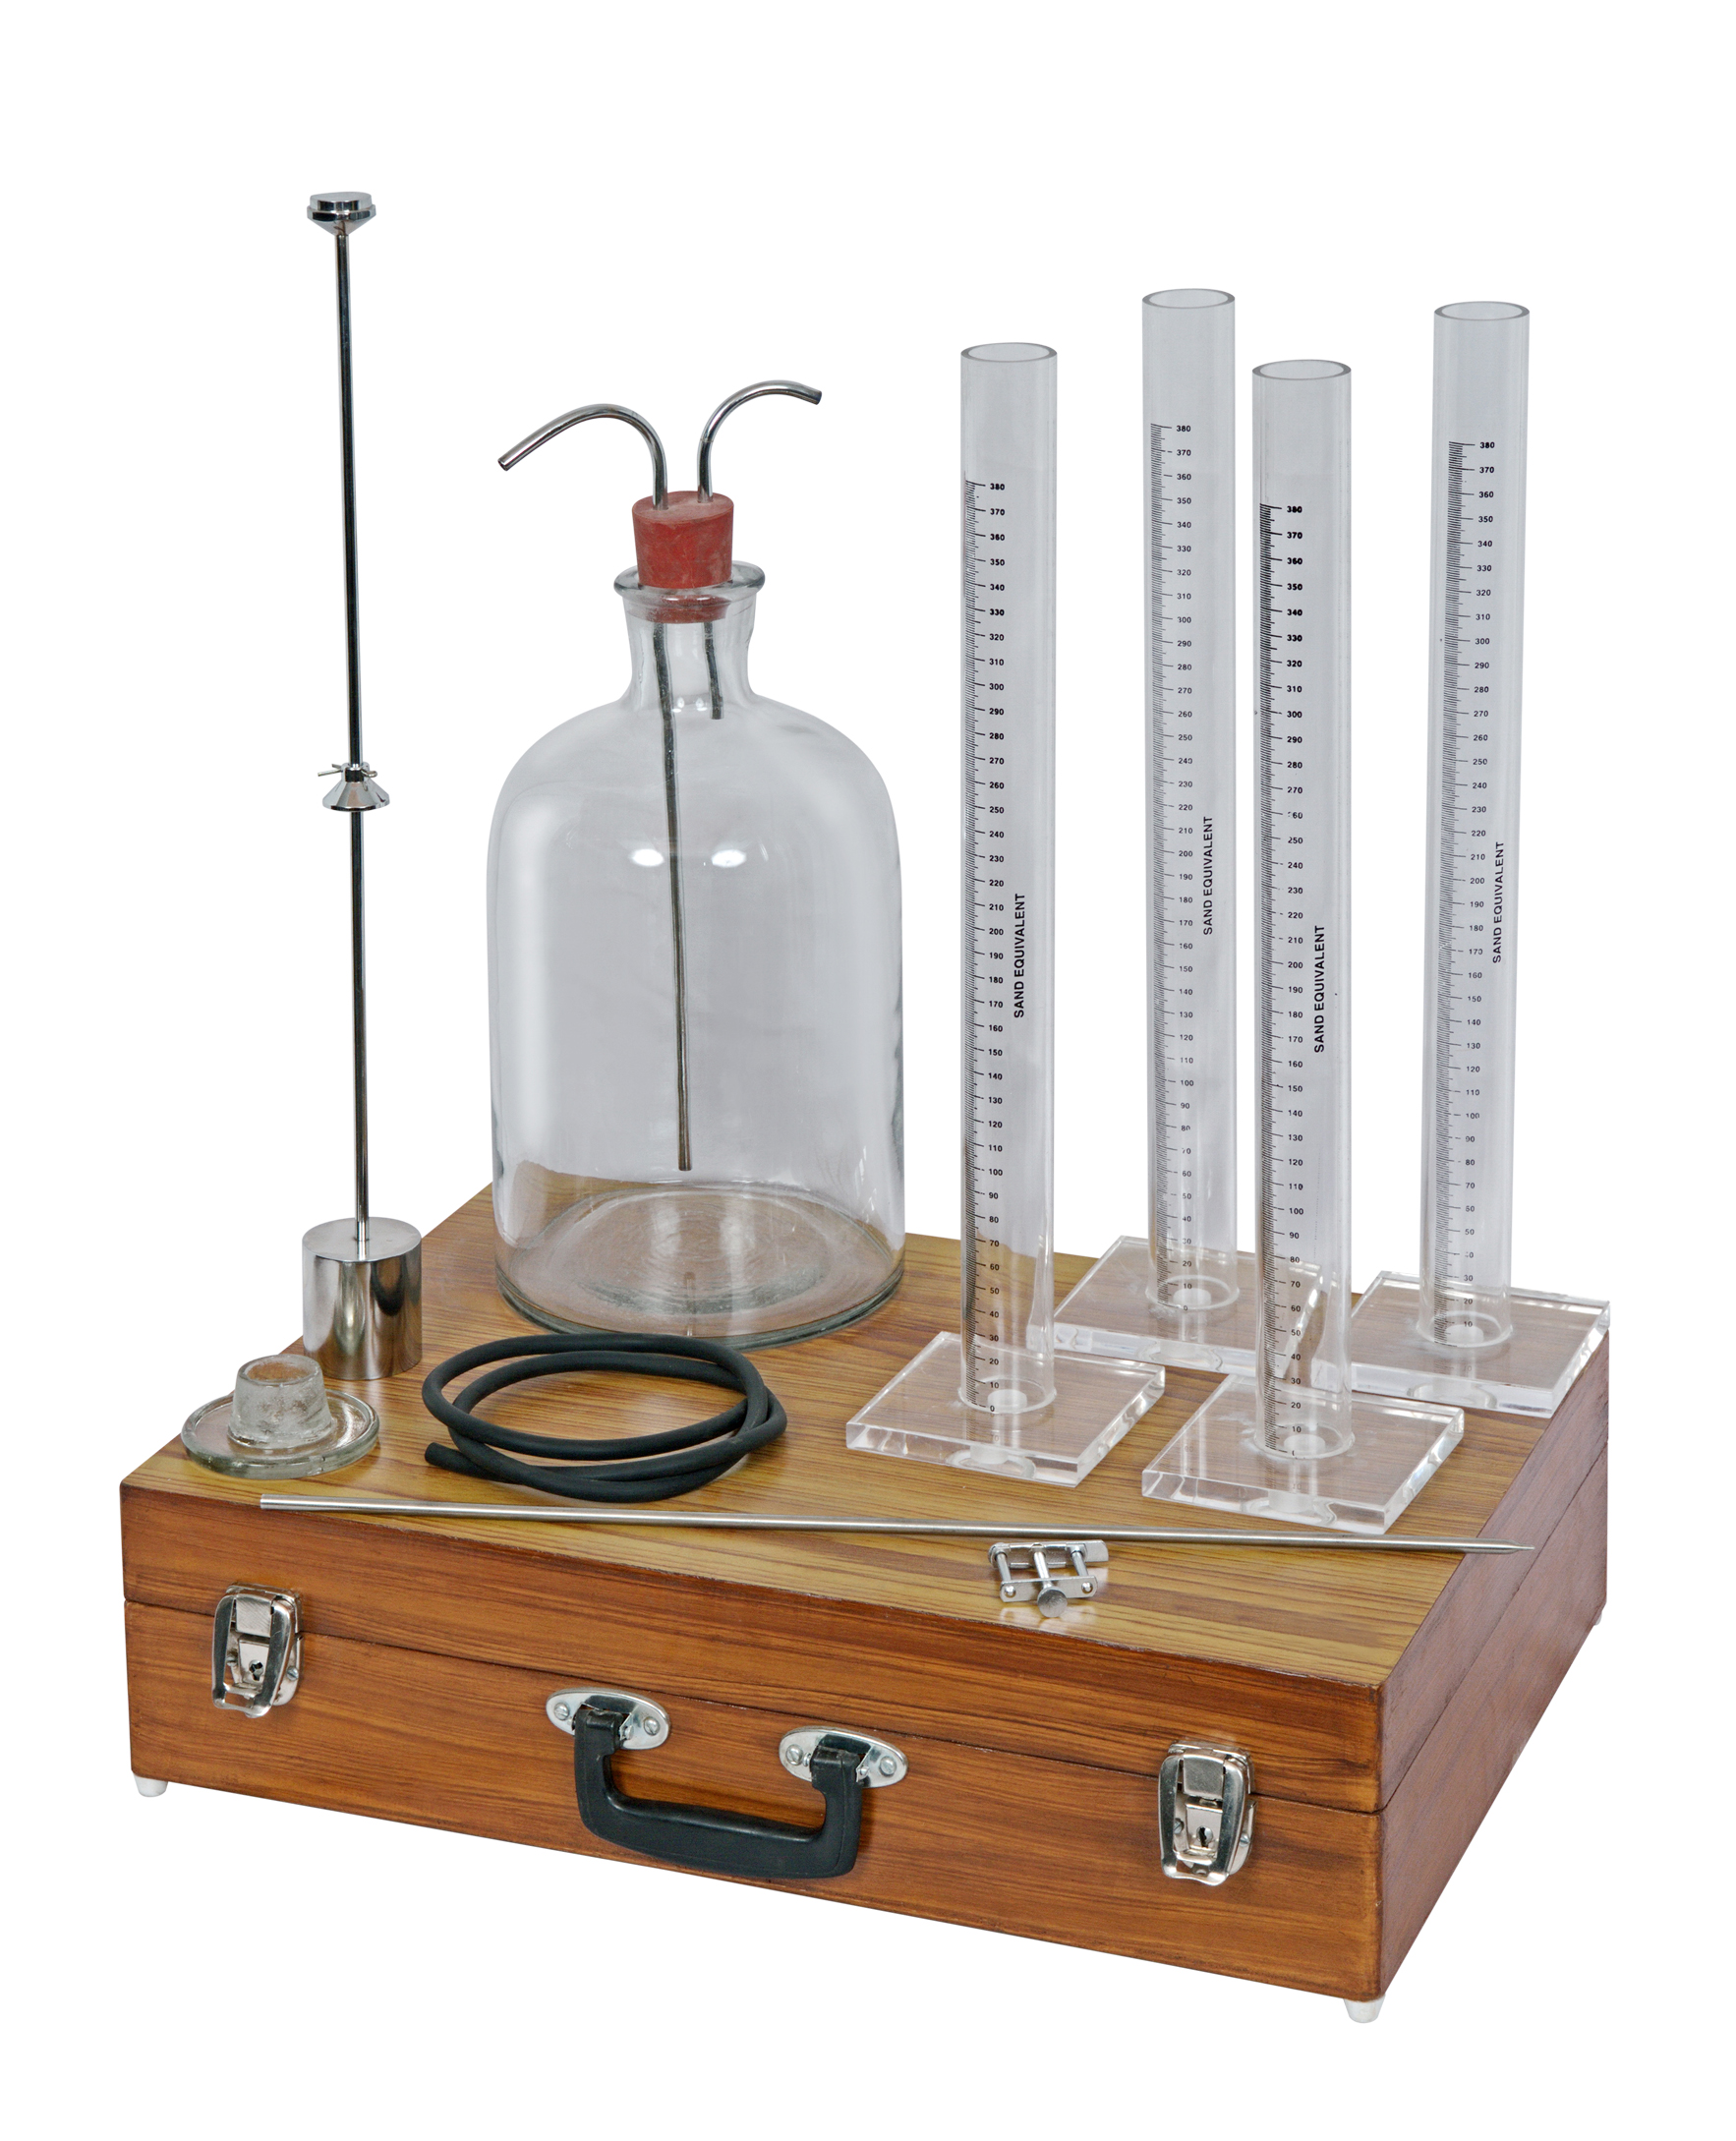 SAND EQUIVALENT VALUE TEST APPARATUS WITH ACCESSORIES